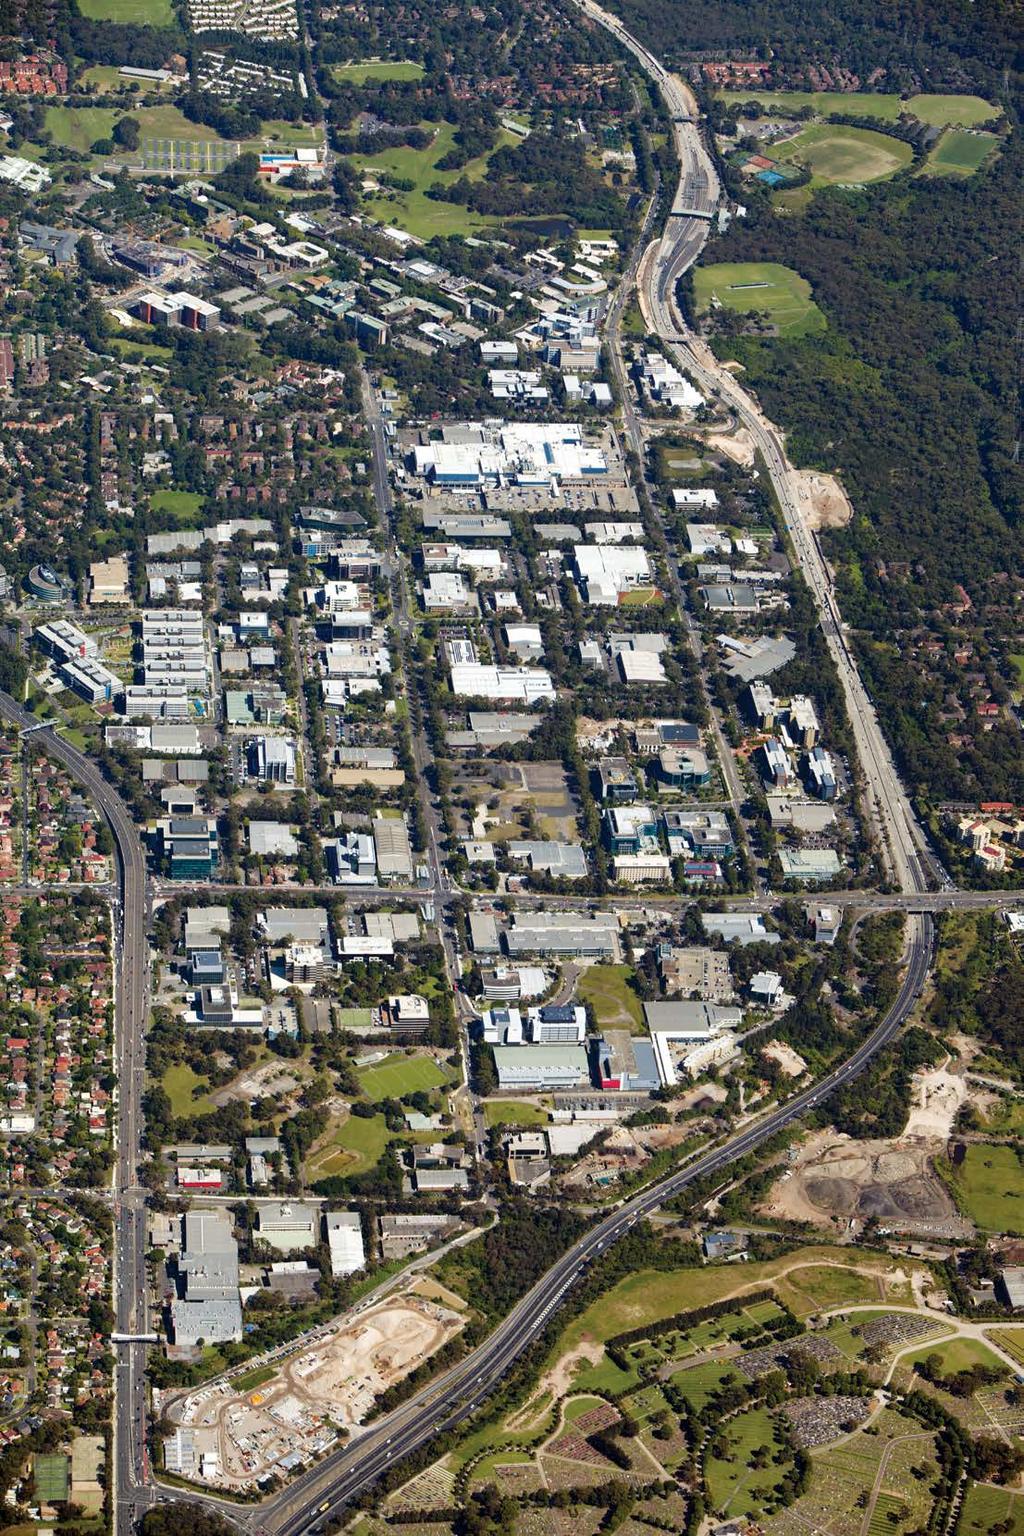 VIEW FROM ABOVE 4 Herring Road Macquarie Uni Macquarie Centre M2 Motorway, Herring Rd and Christie Rd on/off ramps to CBD Talavera Road Khartoum Road